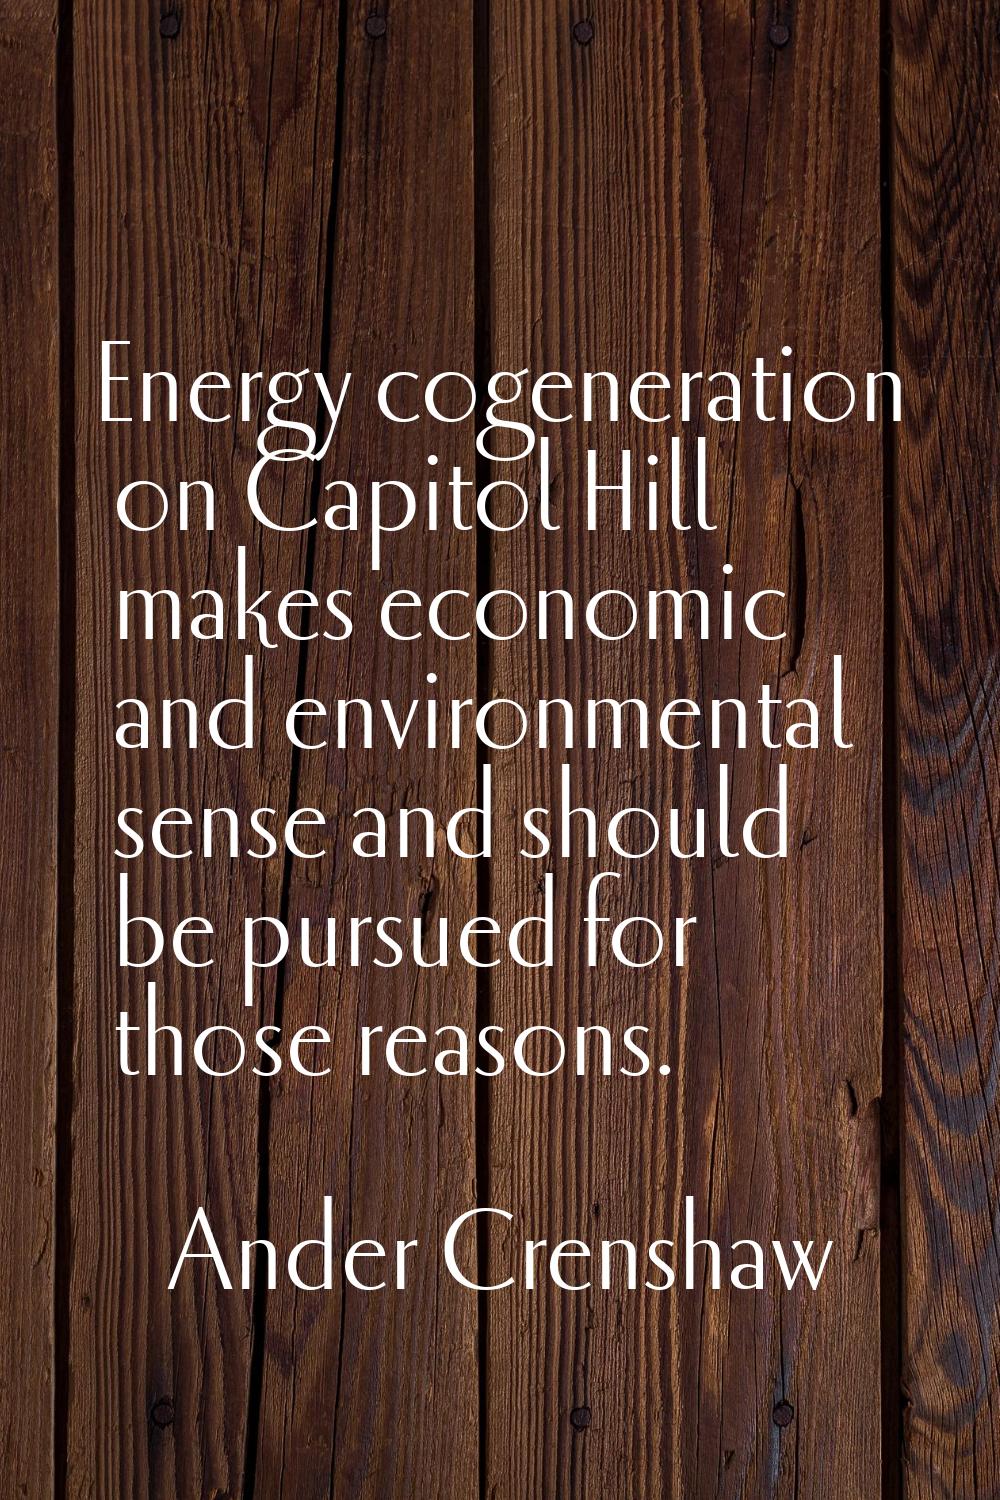 Energy cogeneration on Capitol Hill makes economic and environmental sense and should be pursued fo